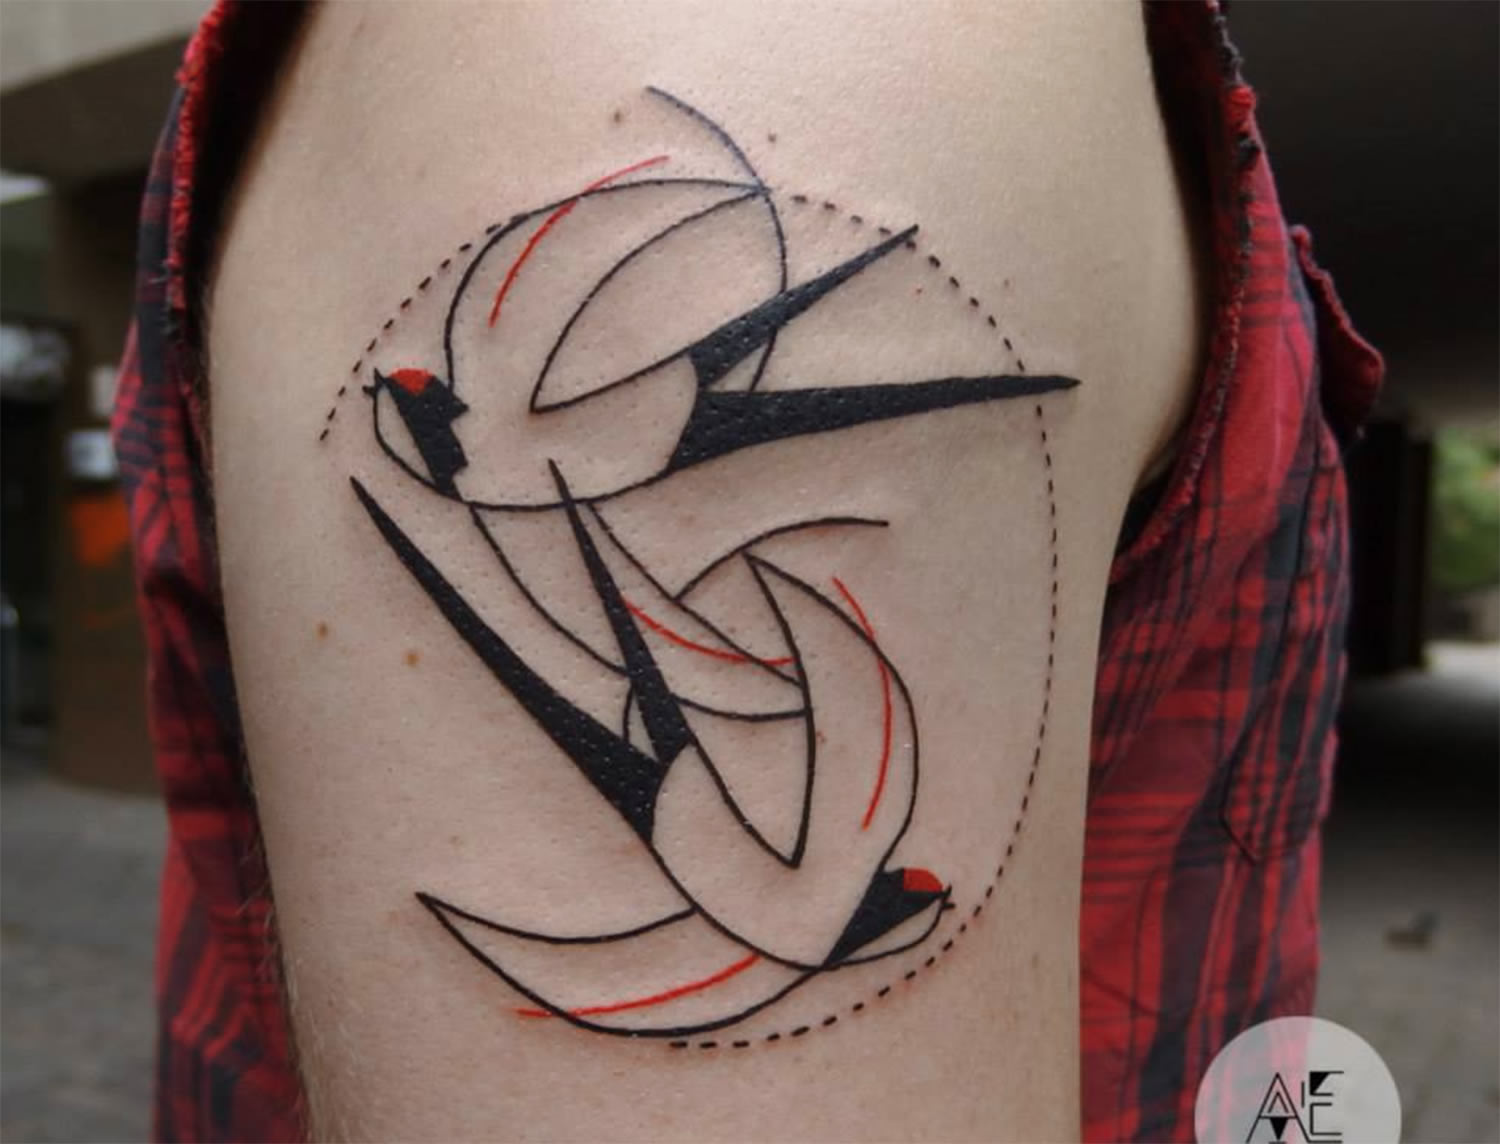 two swallows, line art tattoo by Axel Ejsmont